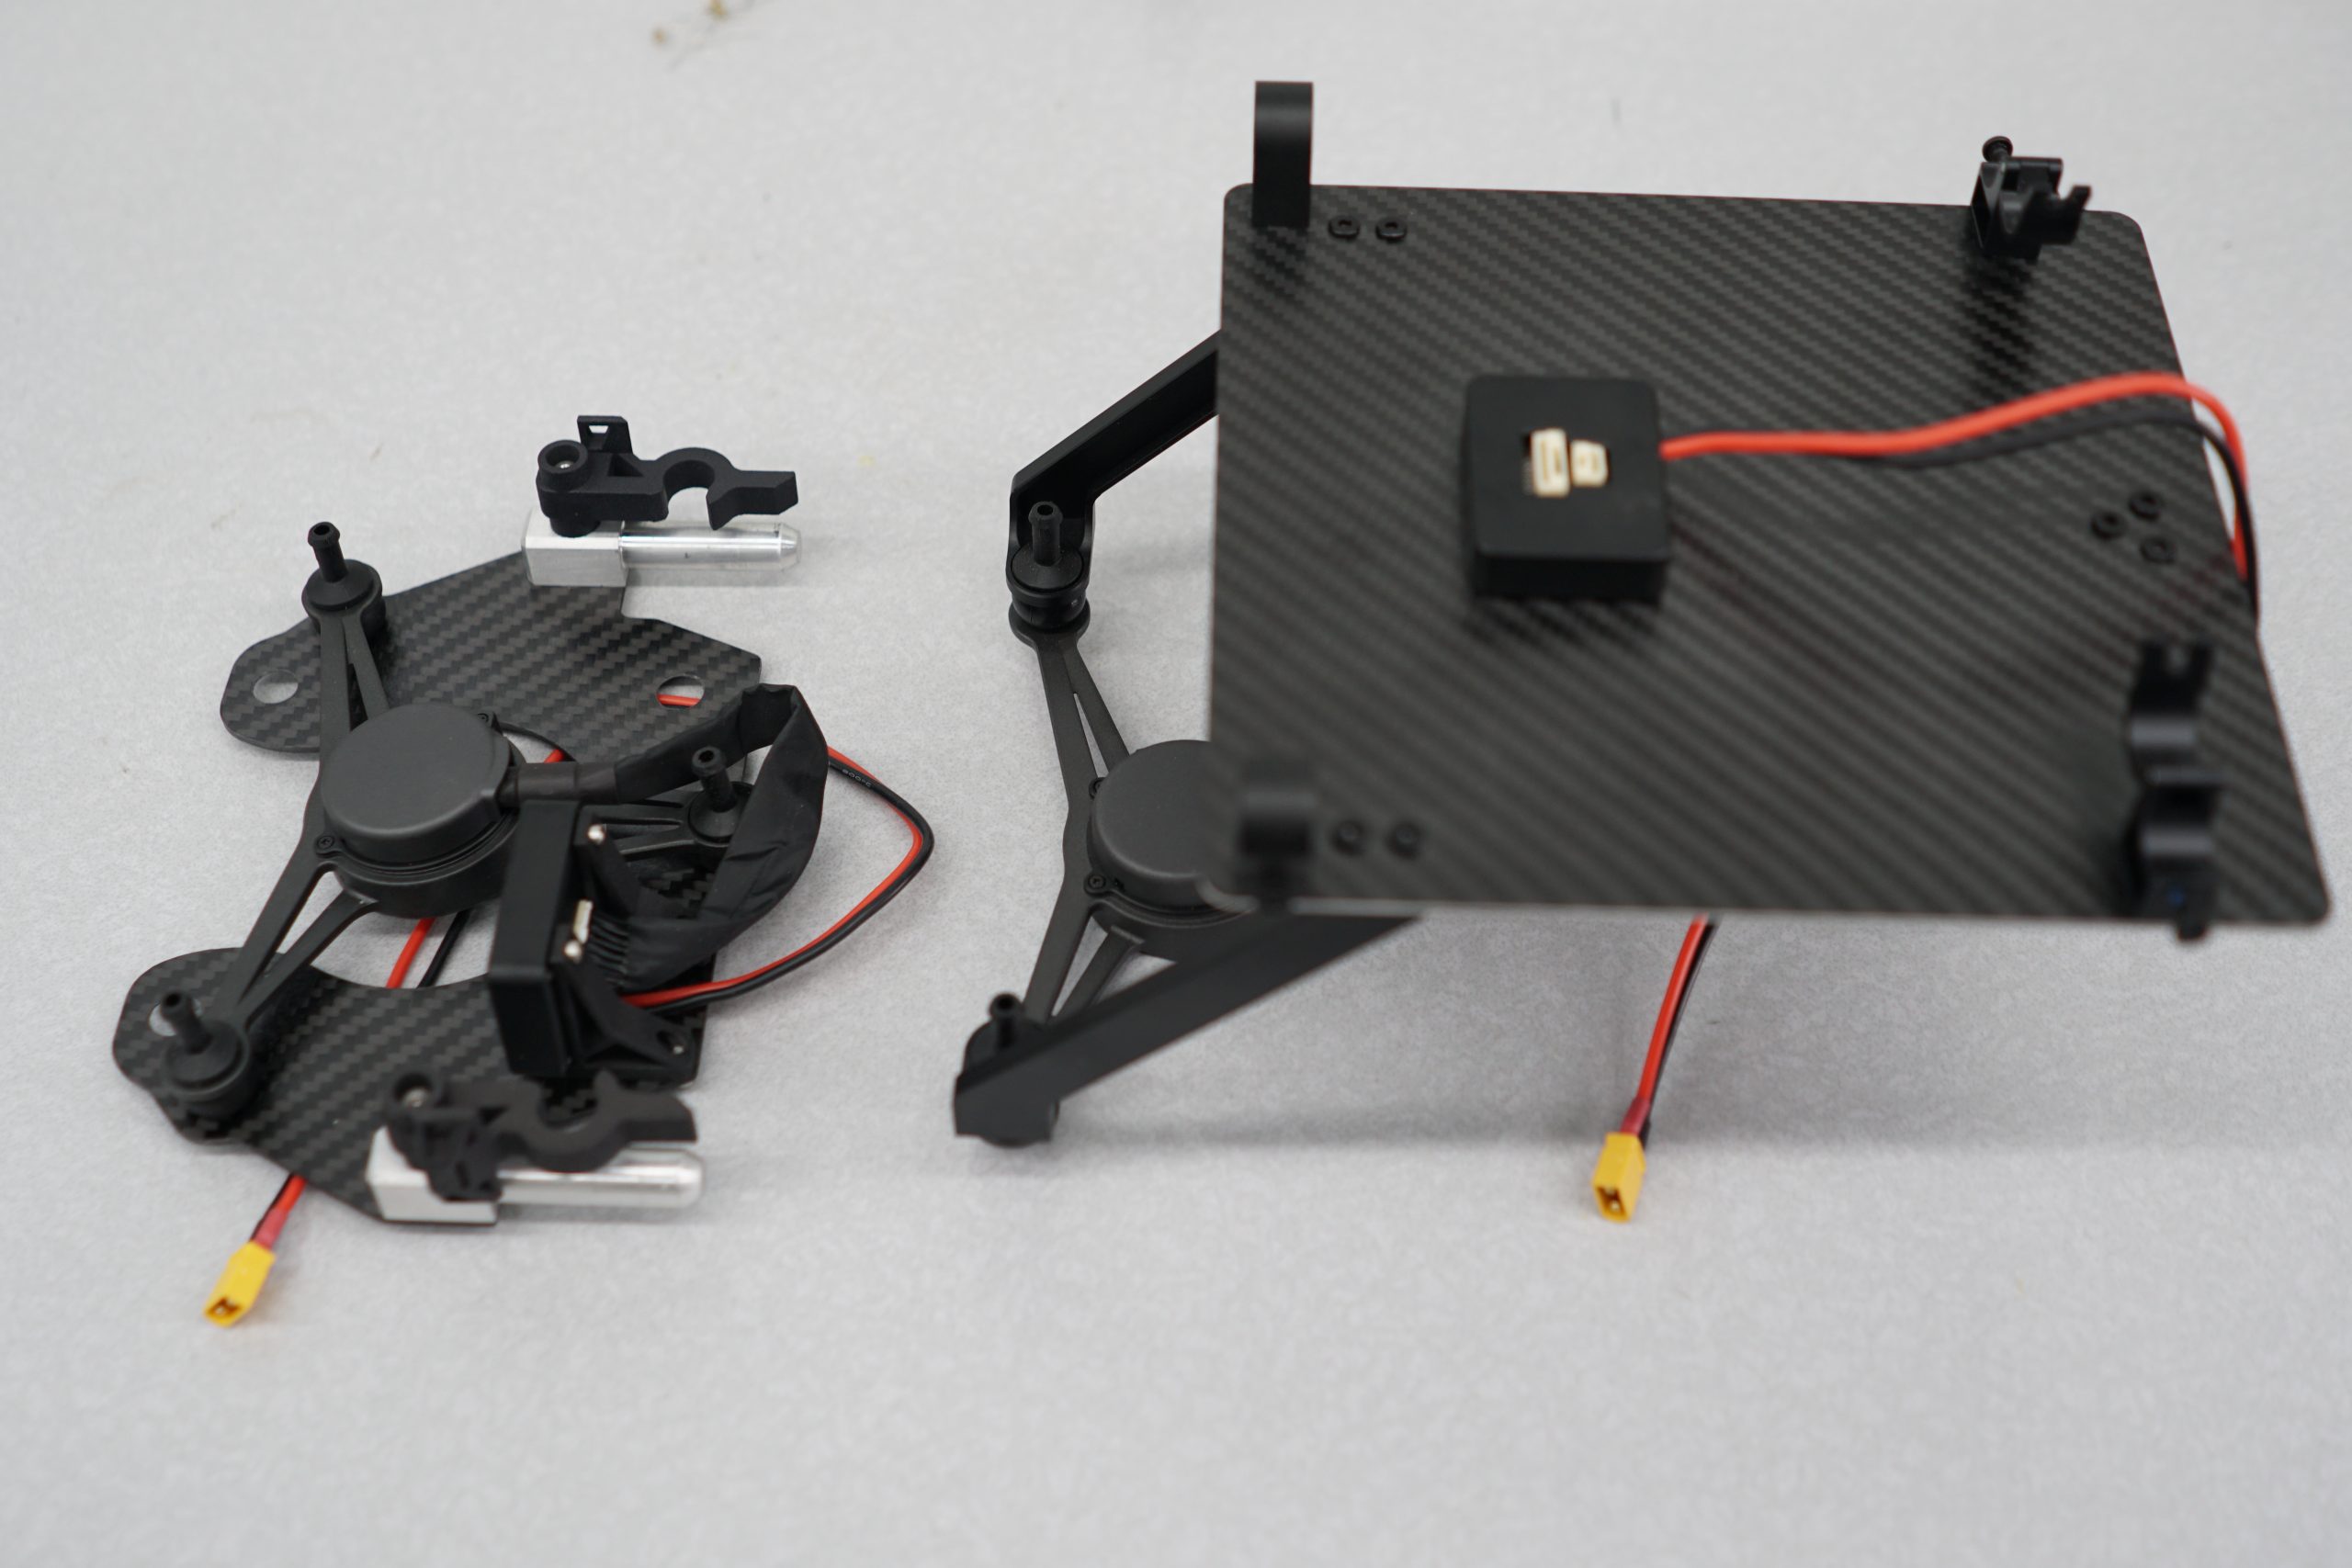 Drone Amplified Mount (left) and Stock DJI Mount (right)